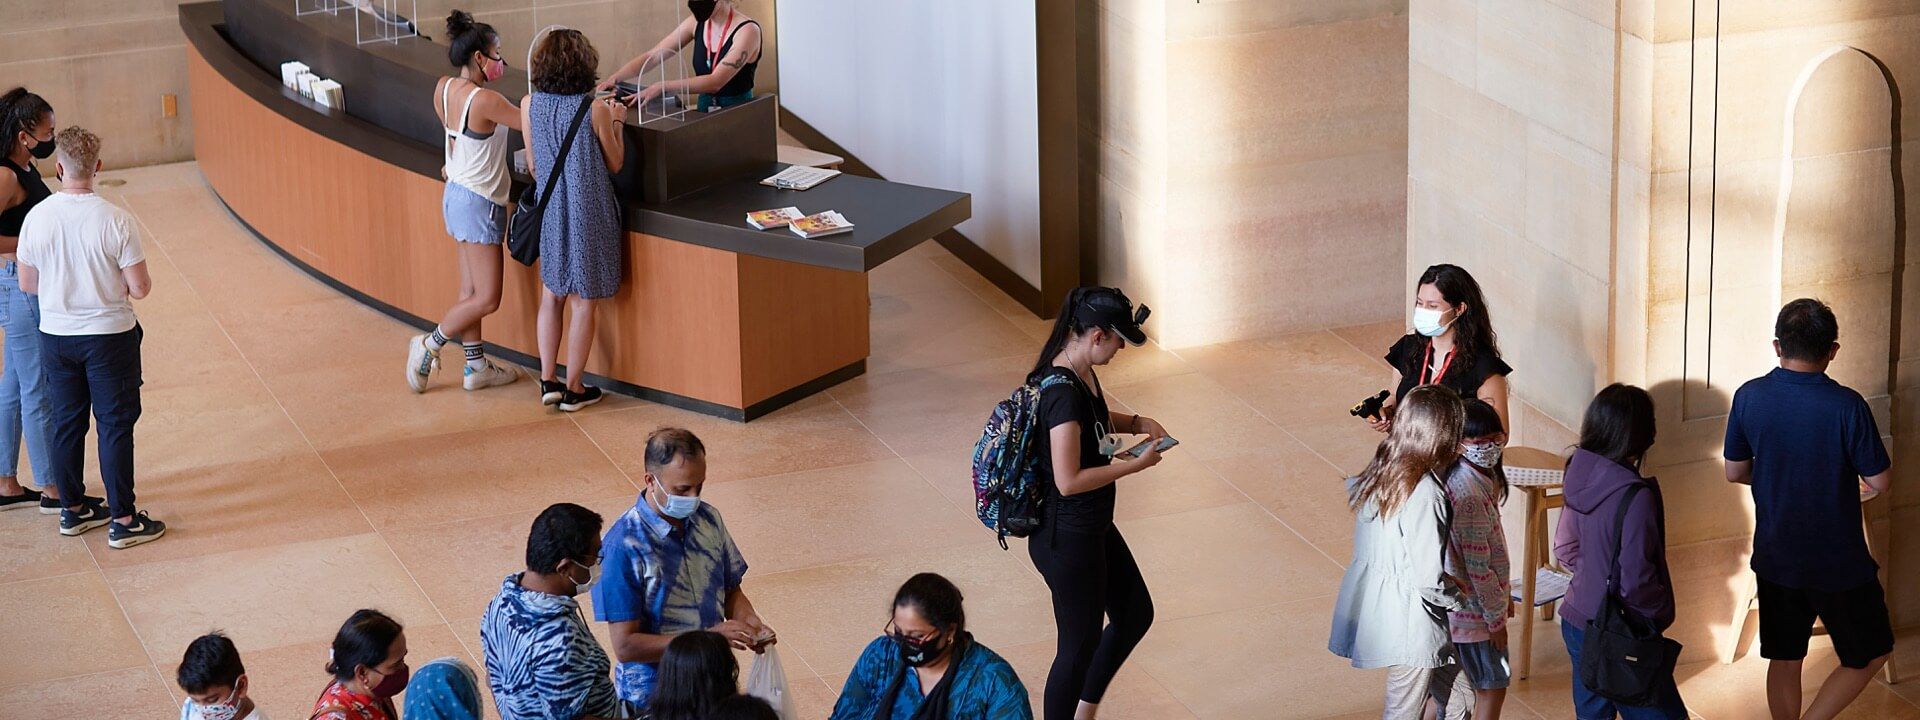 Masked visitors in lobby purchasing admission and getting their tickets scanned by museum staff